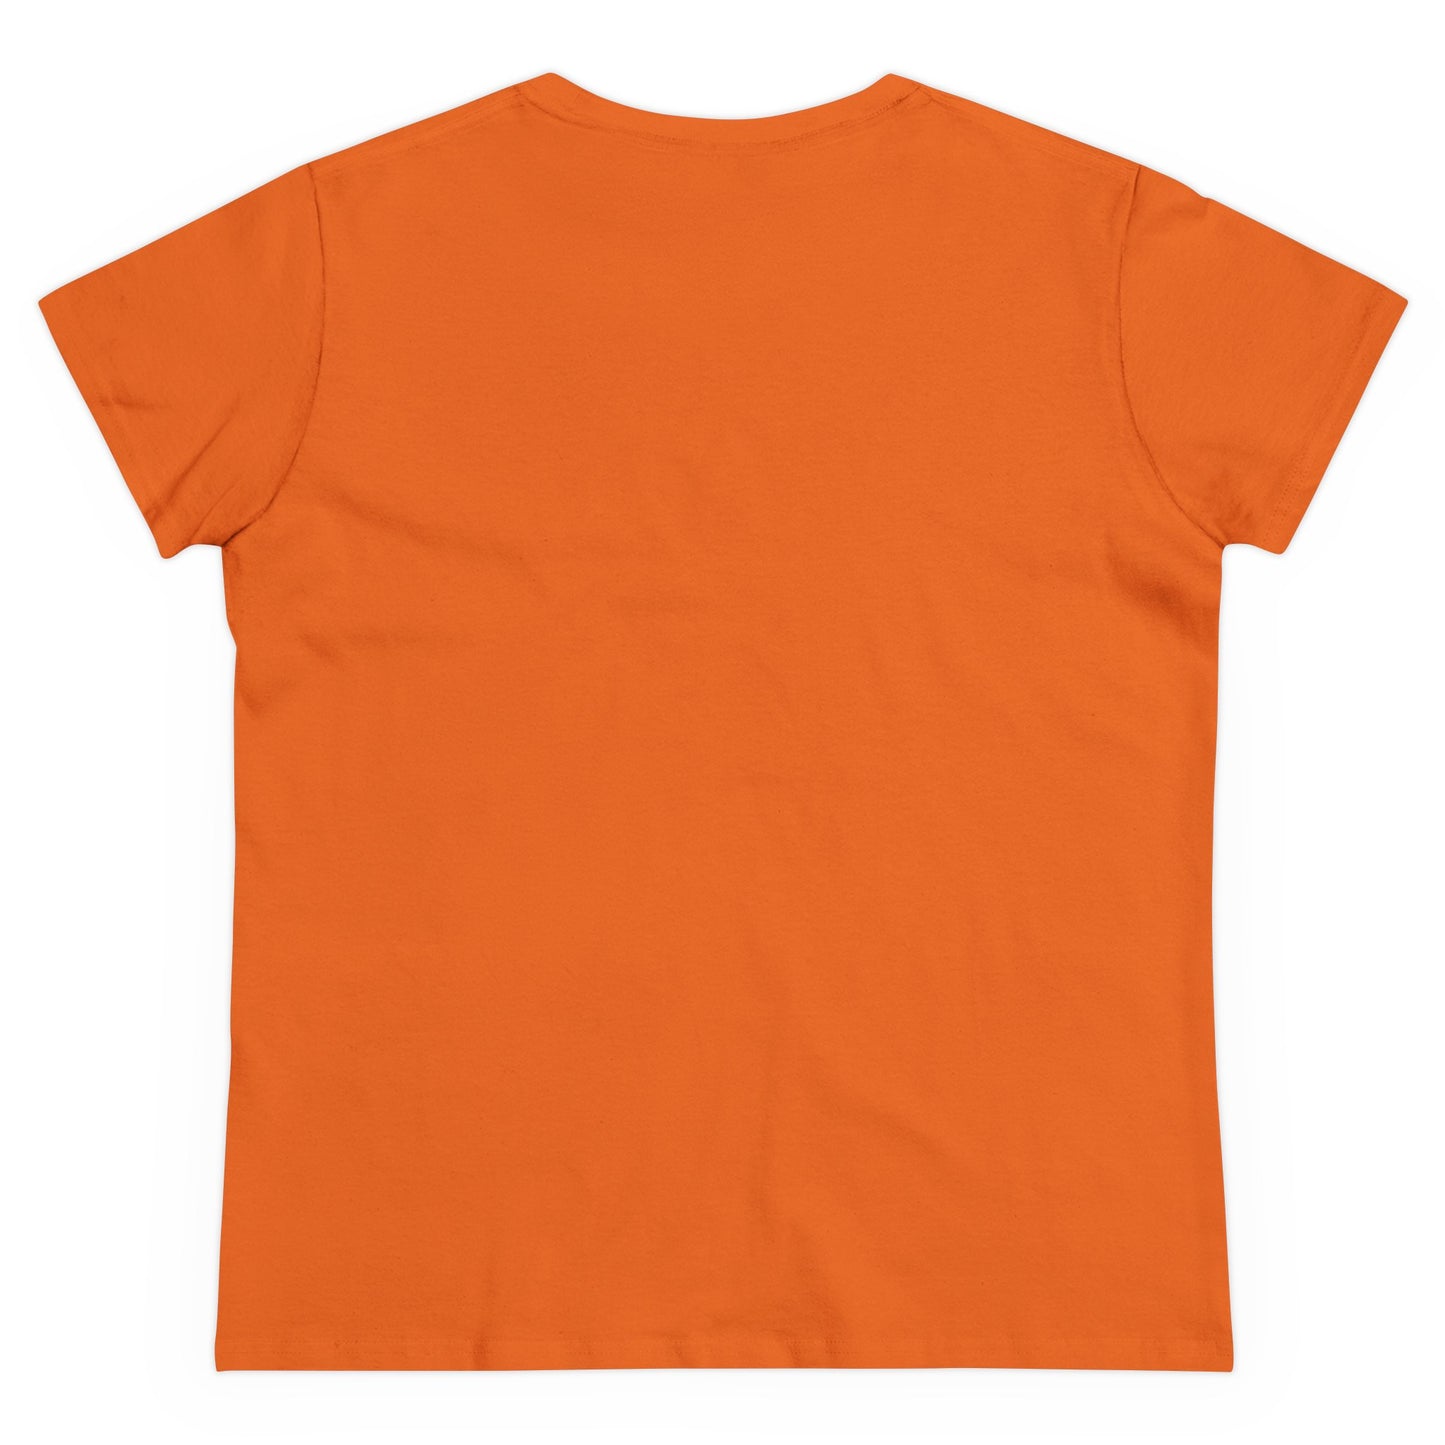 Holidays, Halloween, Animals, Felines- Adult, Semi-fitted, Smaller Size Image, T-shirt